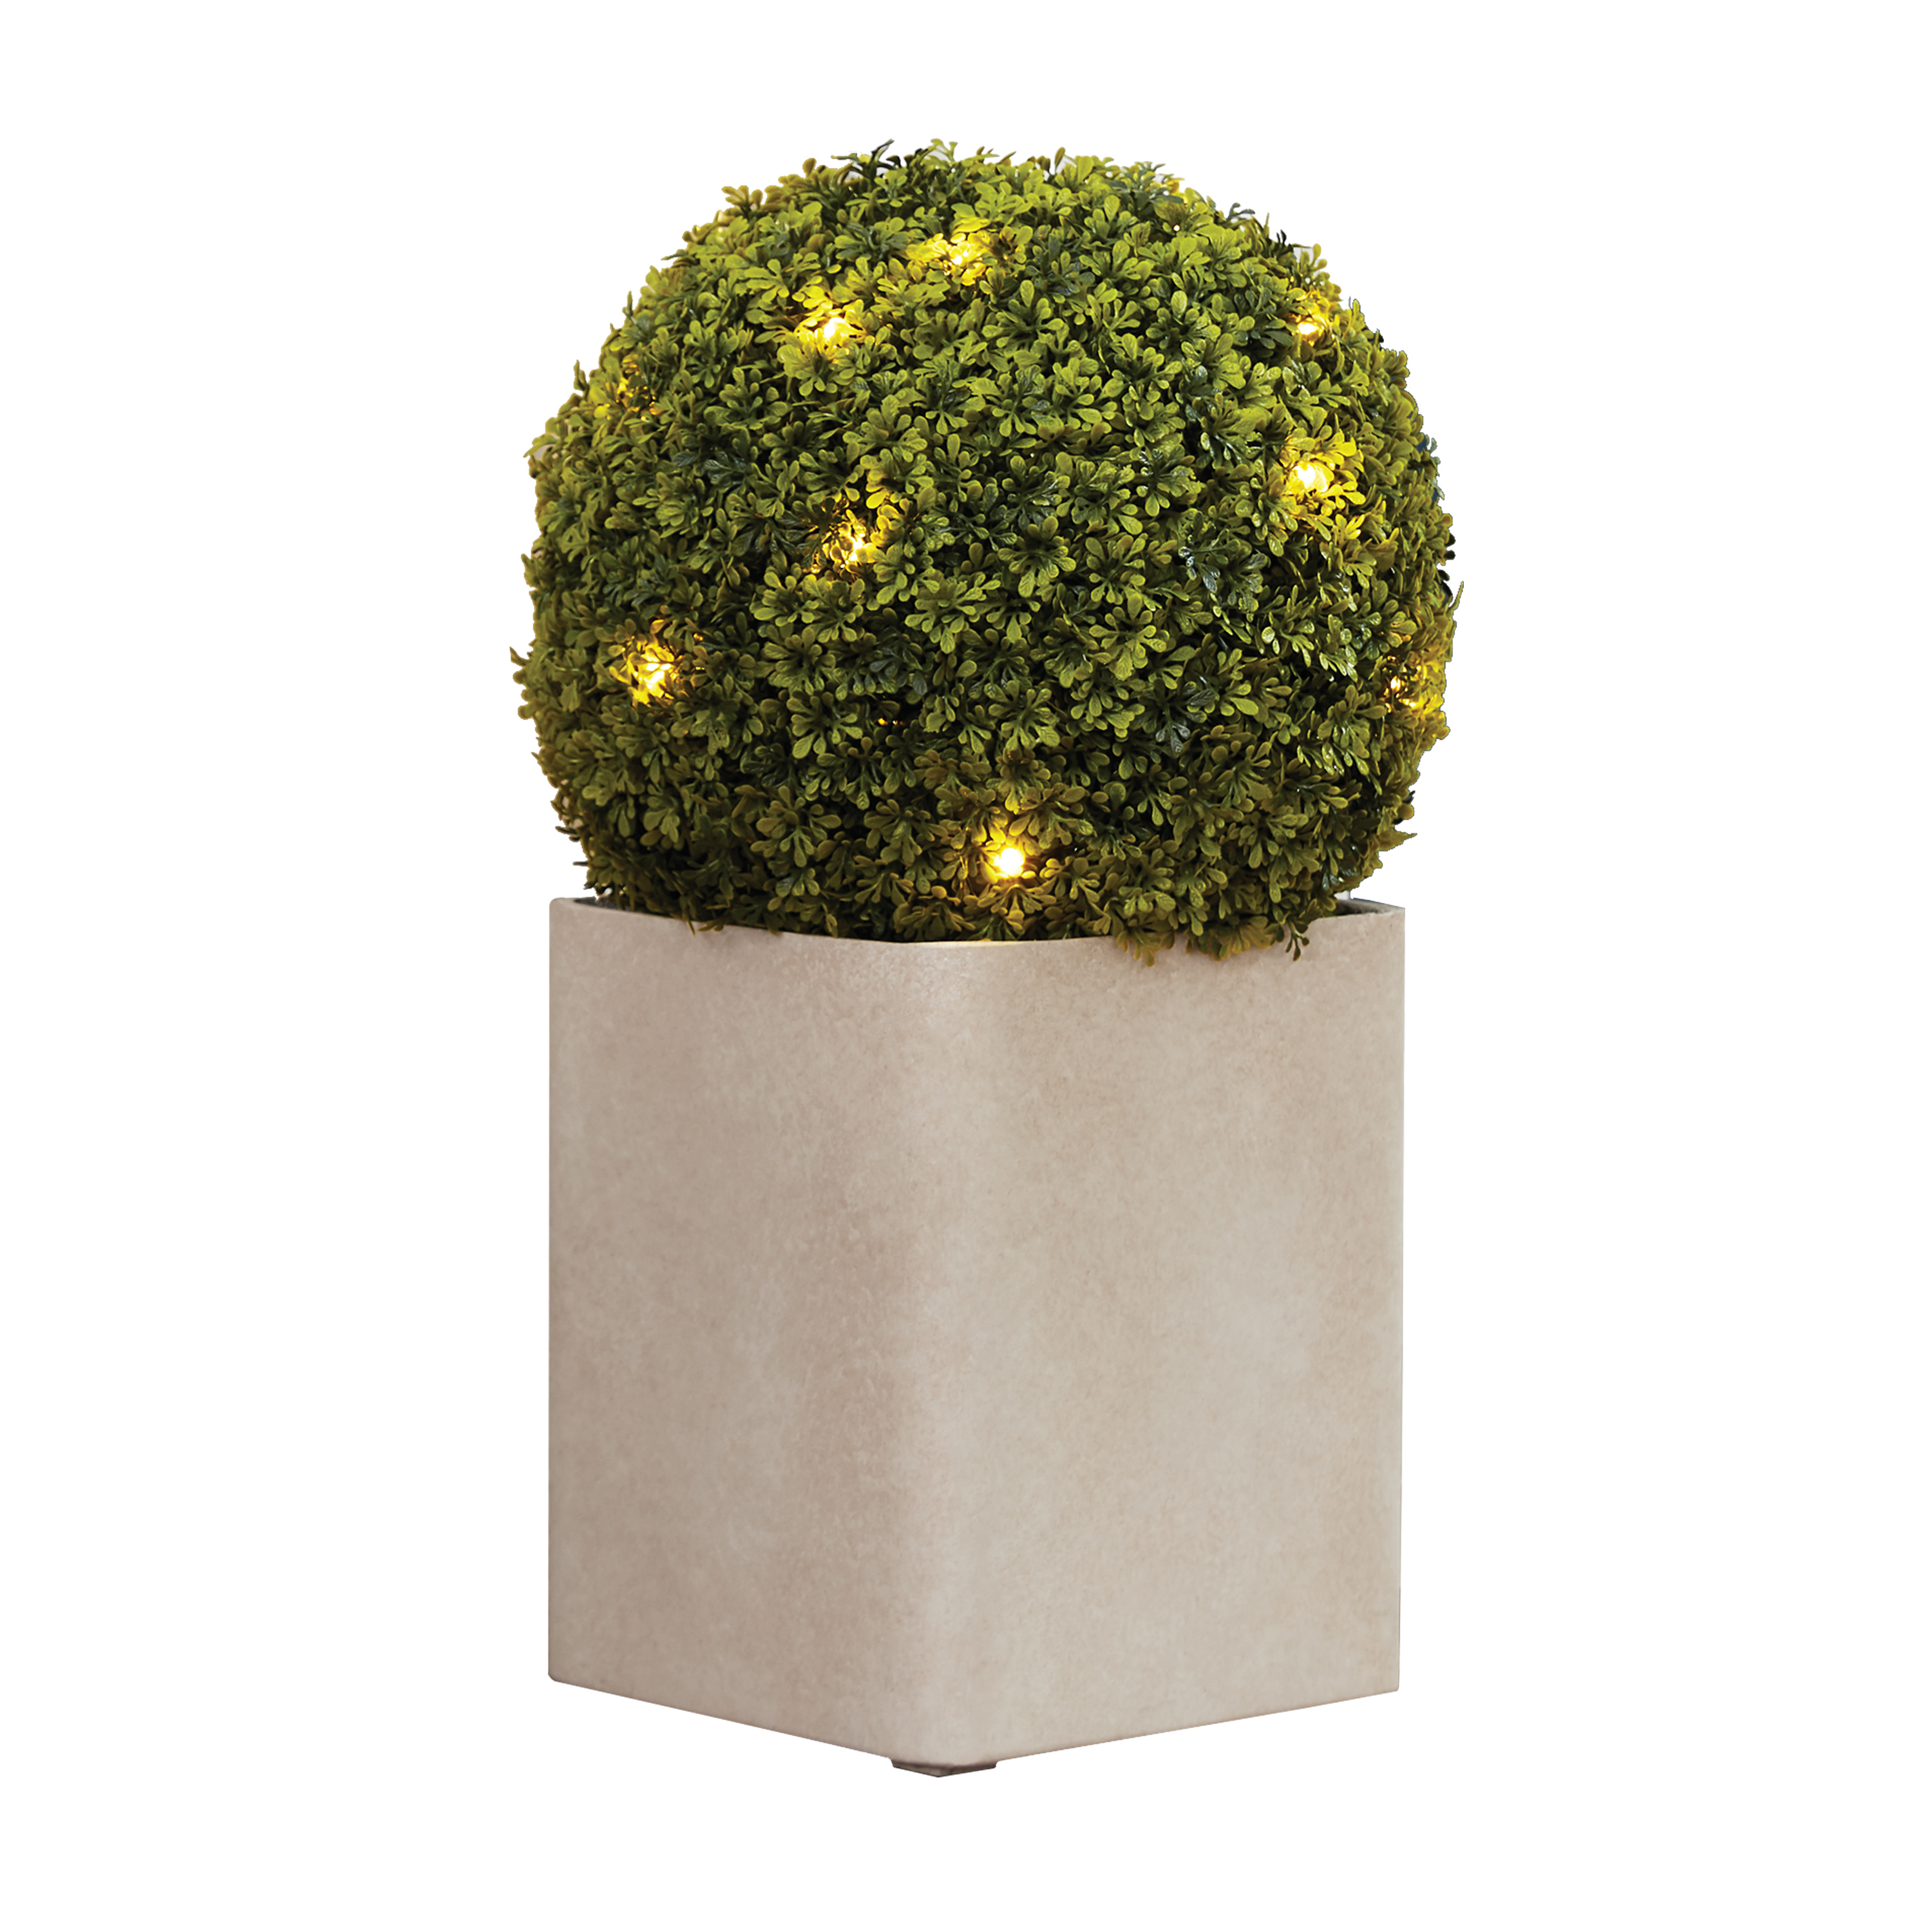 Better Homes & Gardens Outdoor Round 20"H Artificial Topiary Décor with Battery Powered Warm White LED Lights Eyebright - image 5 of 8